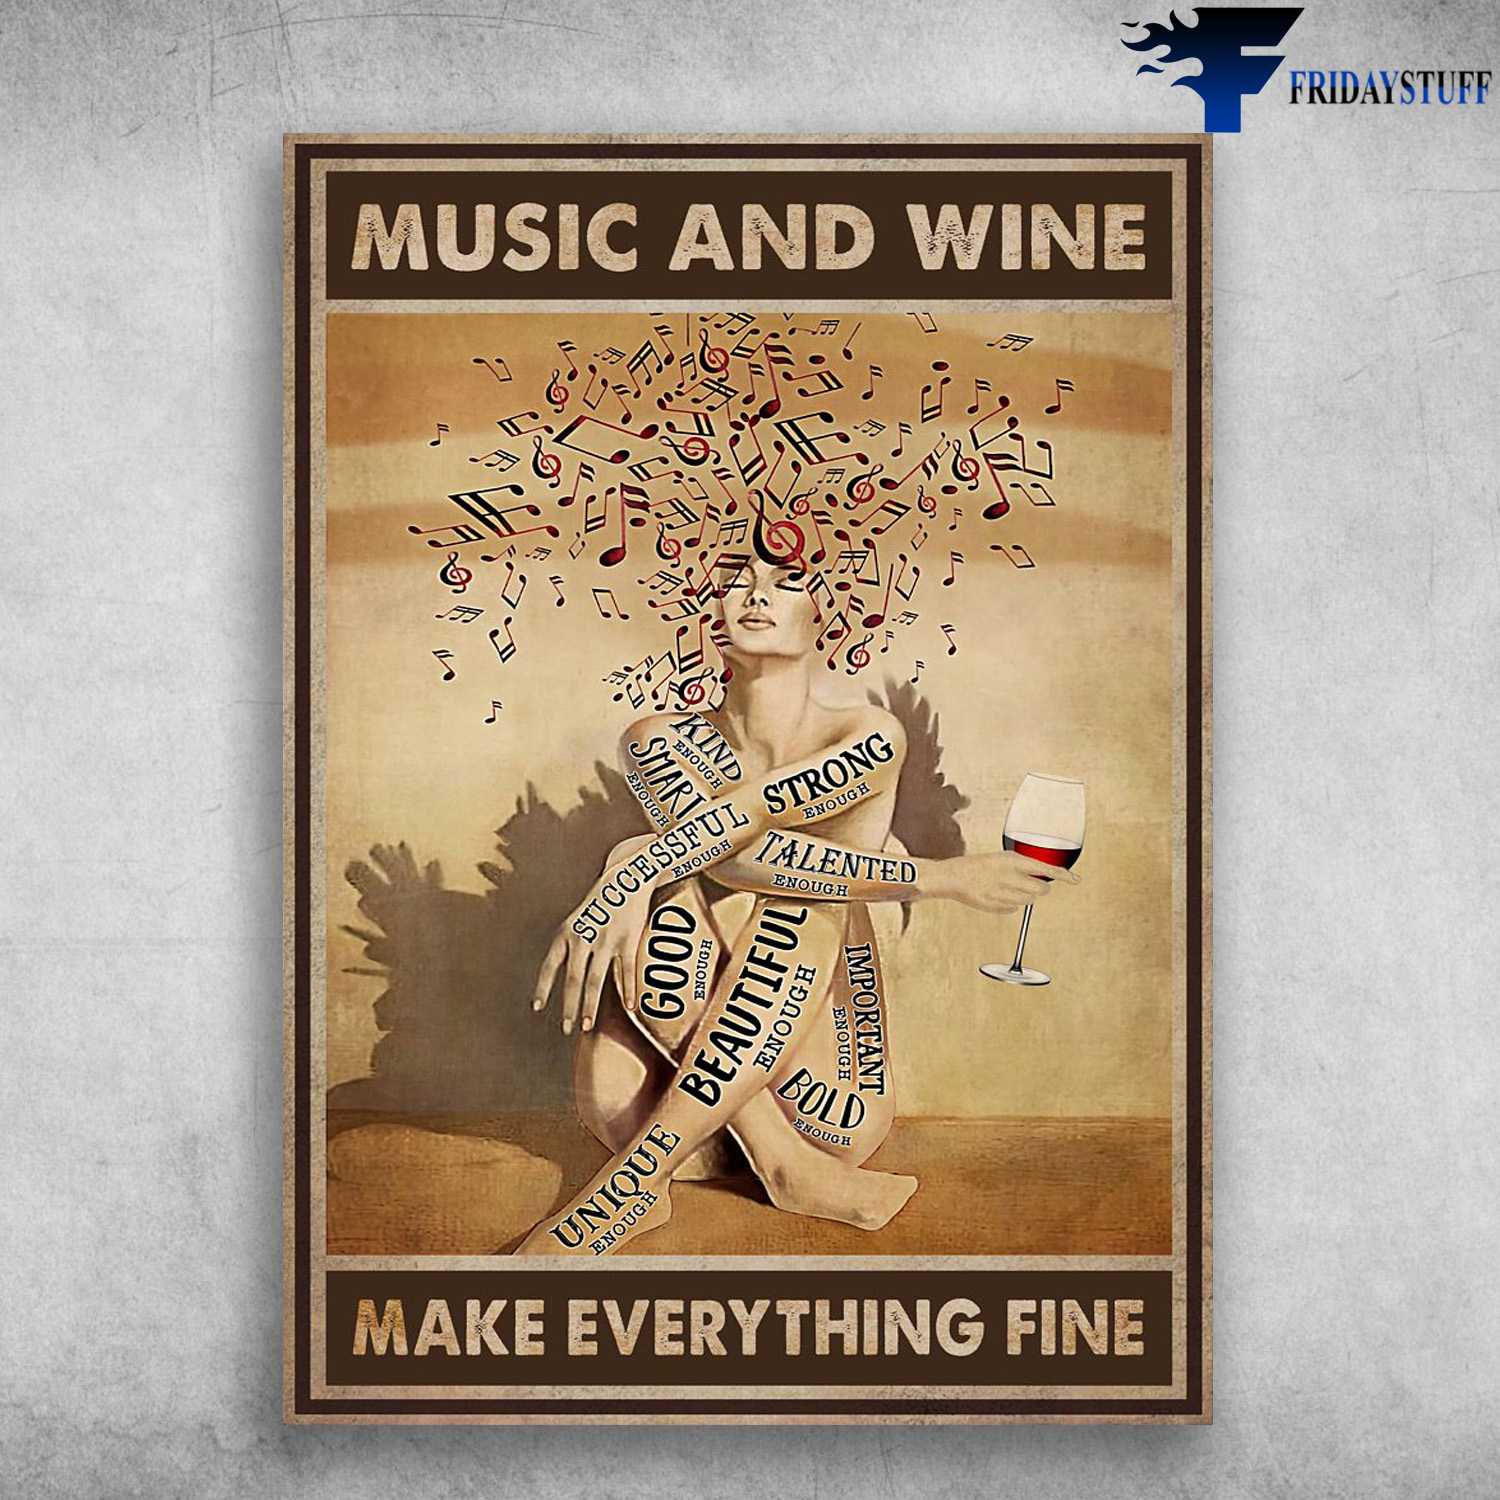 Girl Drinks Wine, Music Lover - Music And Wine, Make Everything Fine